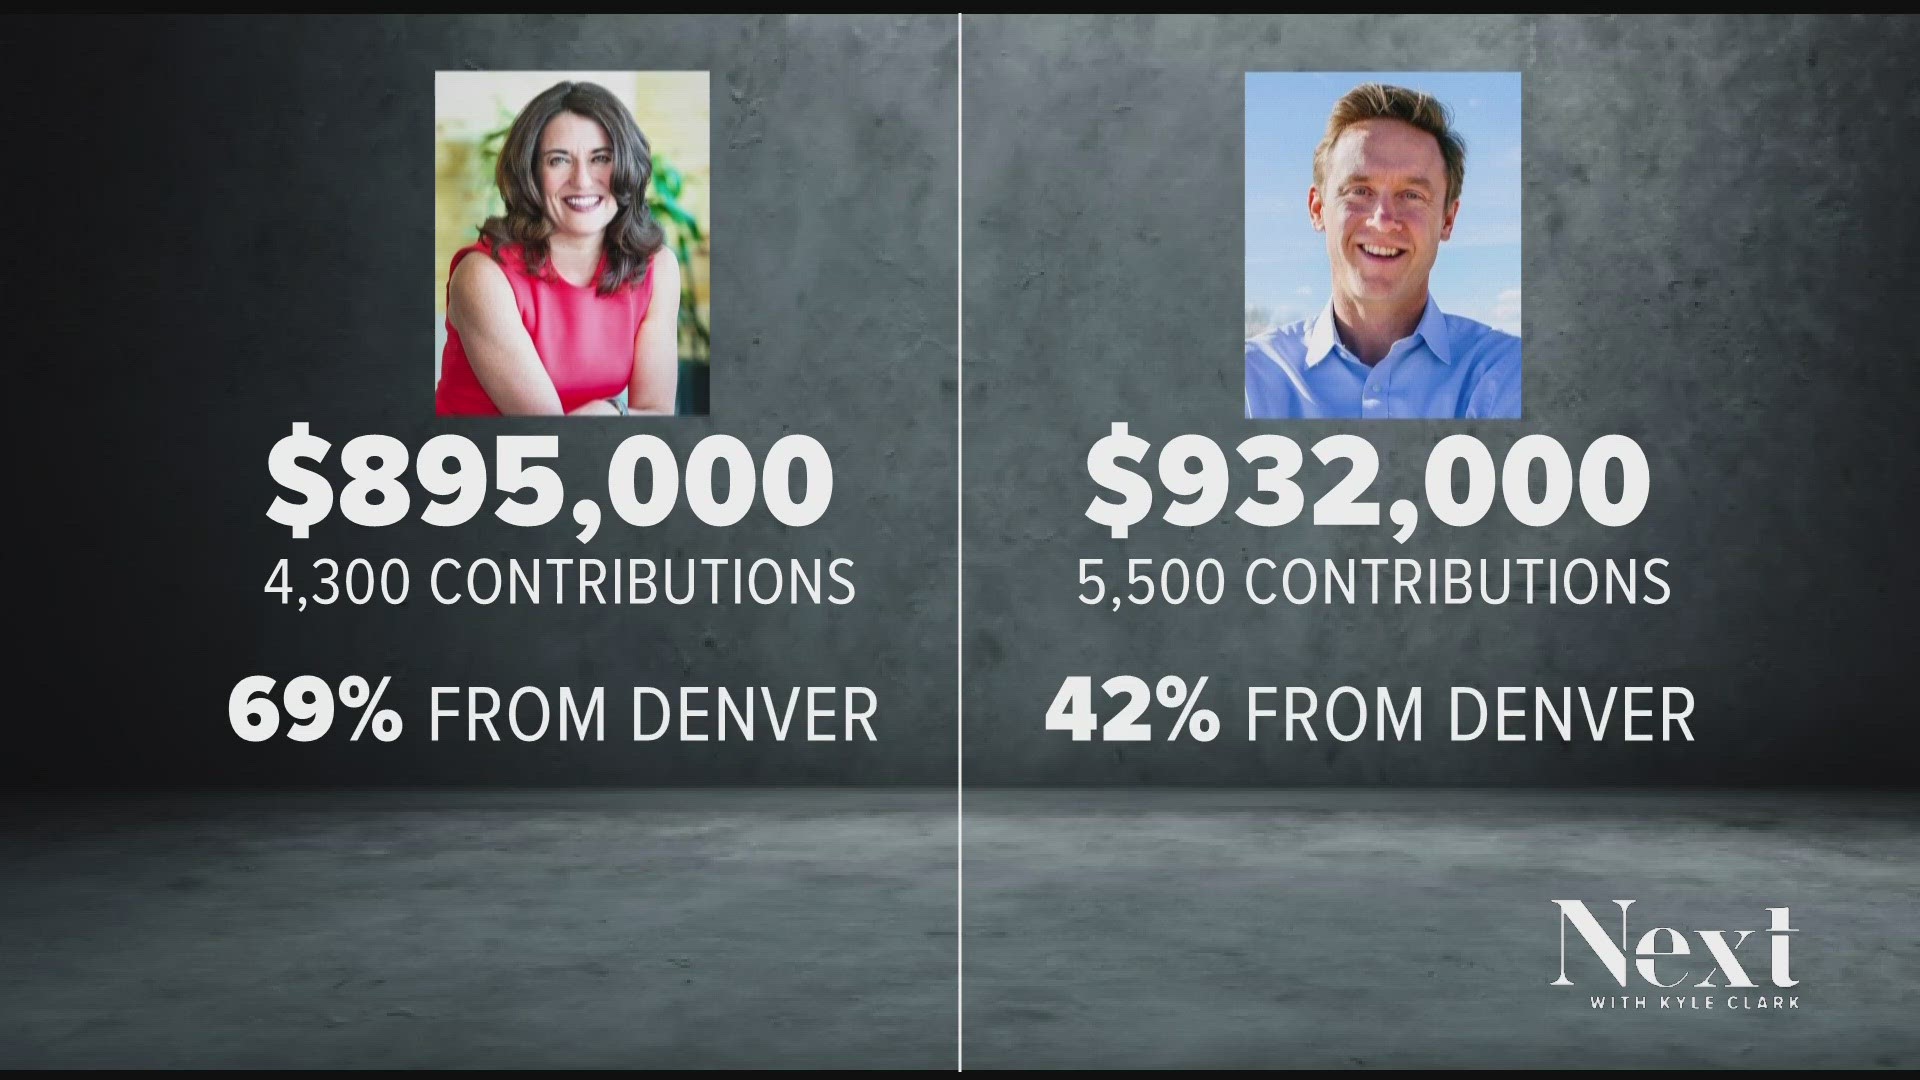 The political ad discussing the money spent to help elect  Kelly Brough's opponent, Mike Johnston, conveniently leaves out the outside money benefiting her.